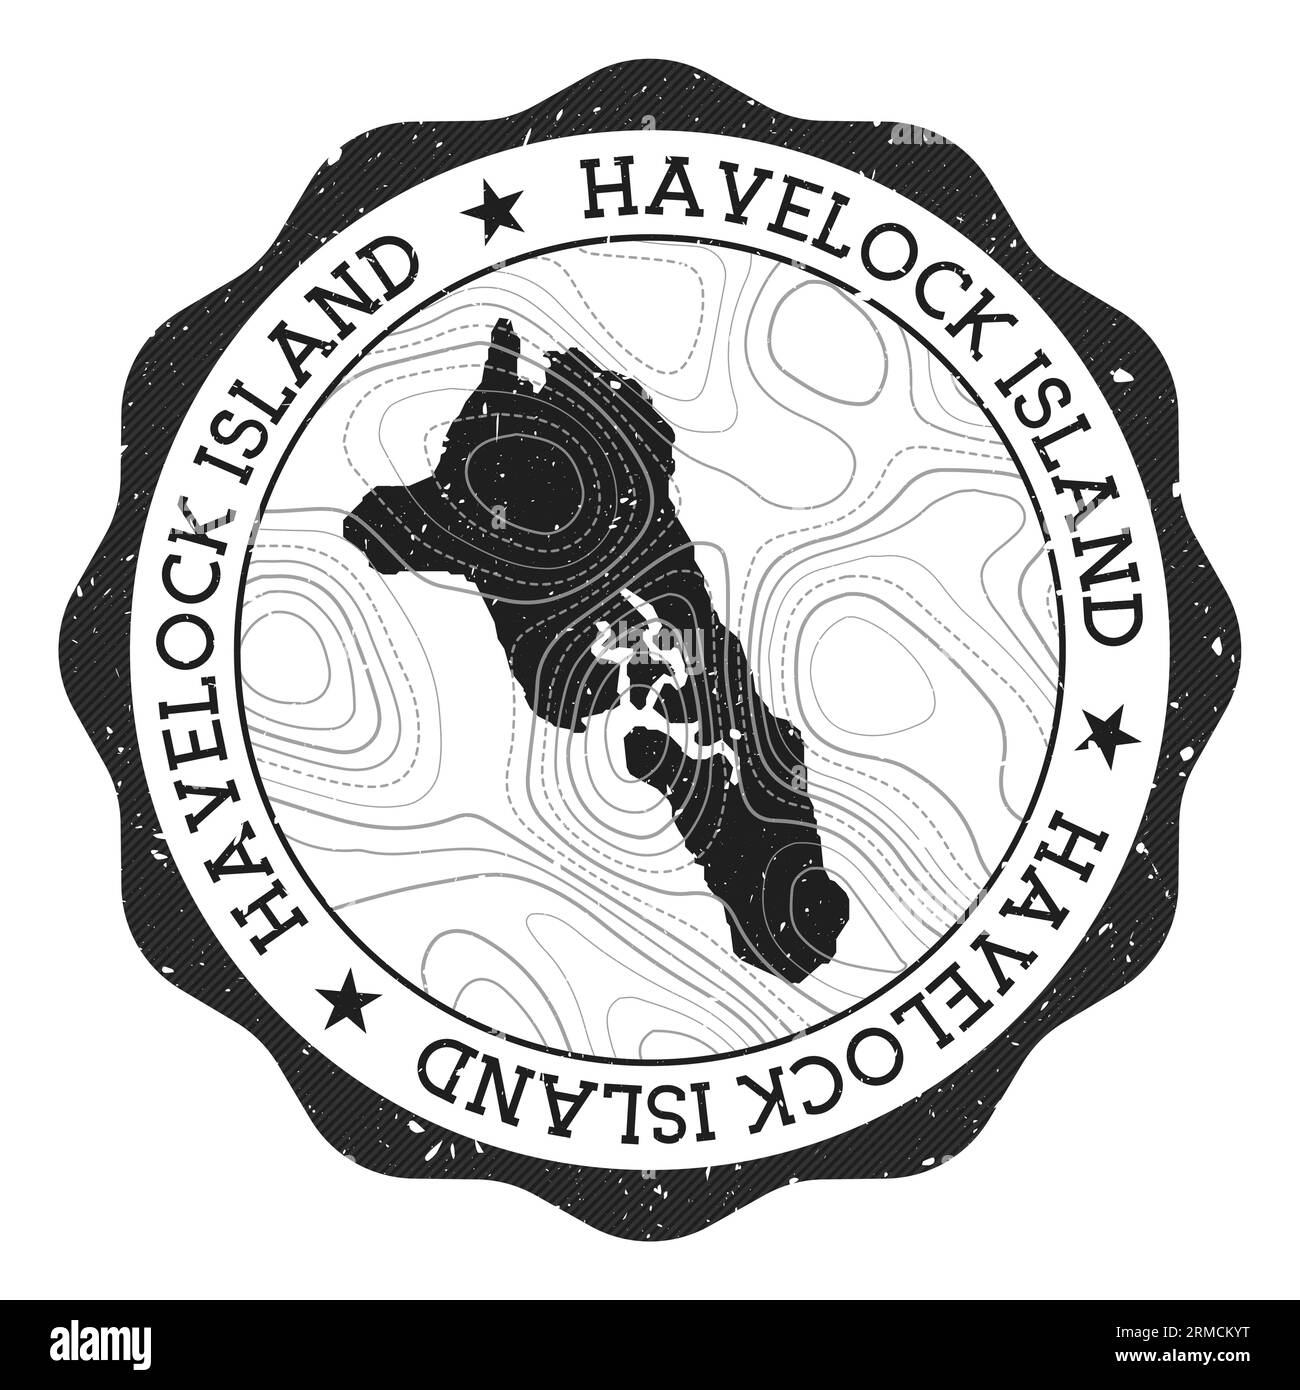 Havelock Island outdoor stamp. Round sticker with map with topographic isolines. Vector illustration. Can be used as insignia, logotype, label, sticke Stock Vector